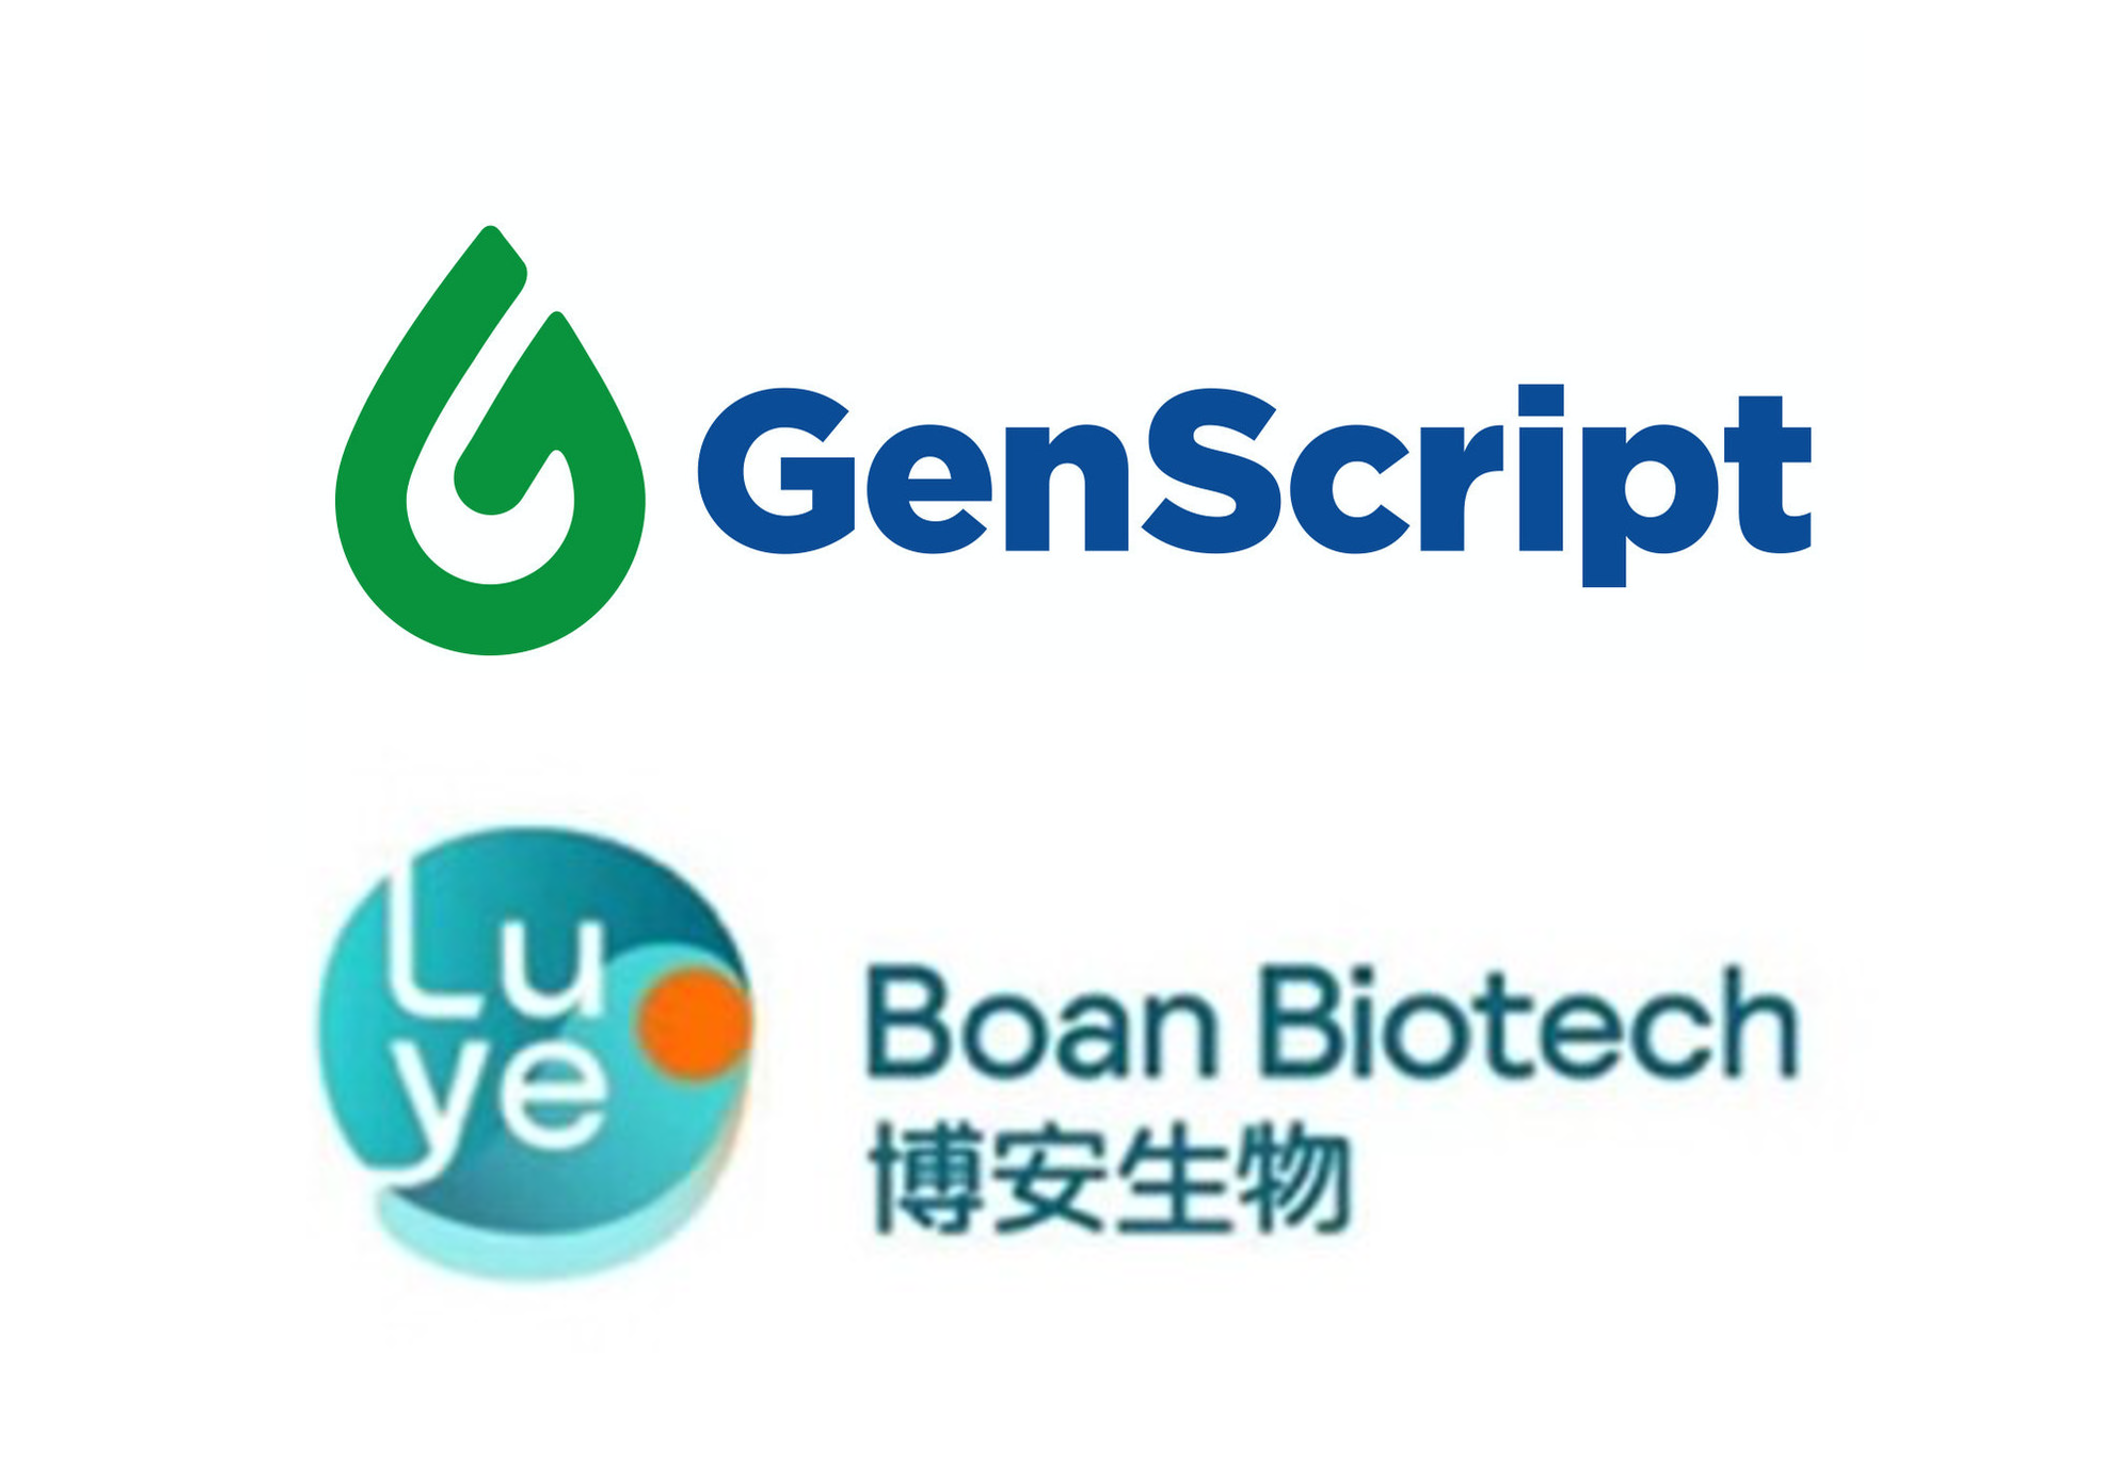 Focus on innovative non-viral cellular therapies! GenScript Biotech and Boan Biotech enter into a strategic partnership